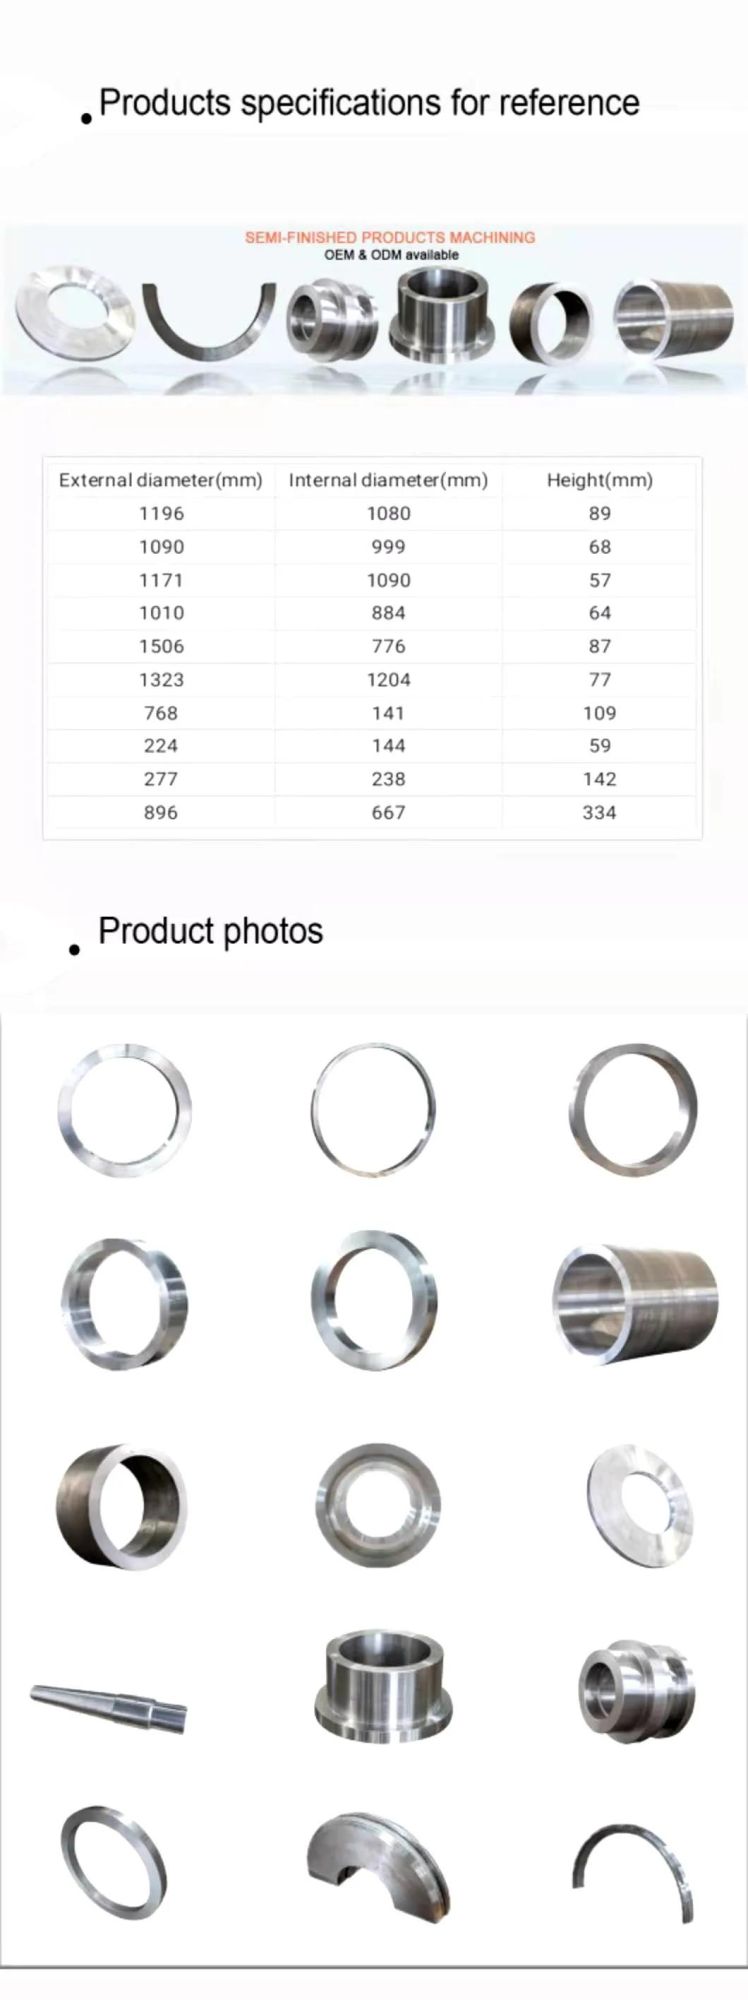 Specialized Hot Forging Parts in Automobile and Agricultural Machinery